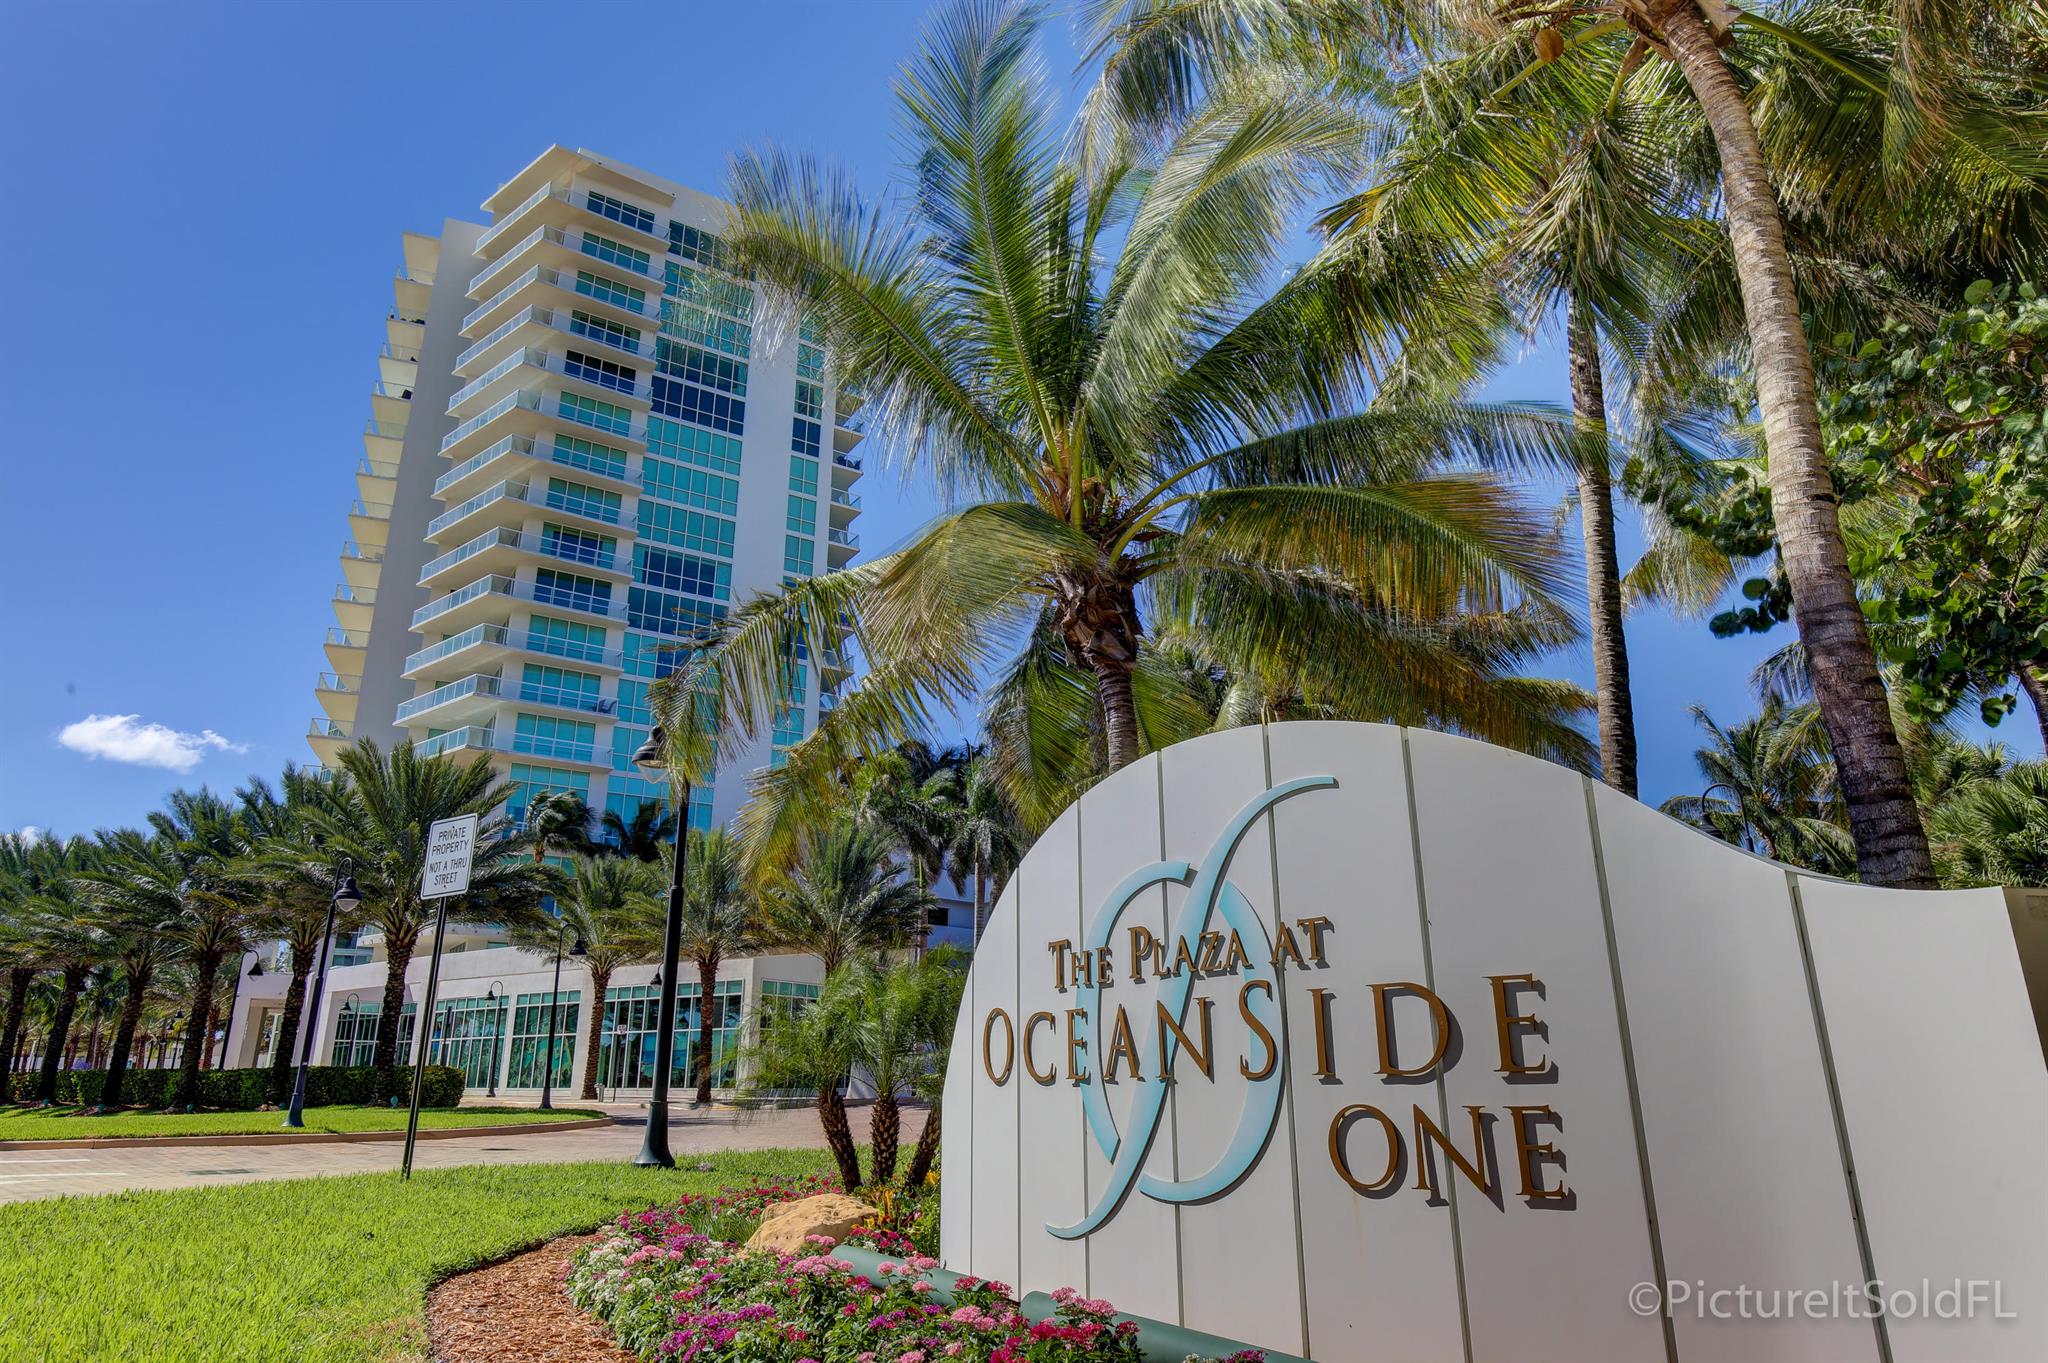 Welcome to the Plaza at Oceanside! Luxury Florida Lifestyle with Gorgeous Intracoastal/Marina/ City and Sunset Views! This immaculate ''Steven G.'' professionally designed 2 bdrm/2 bath sky residence features an open floor plan, floor to ceiling impact glass sliders, and a gorgeous water view from the huge full- length terrace. This spectacular unit comes fully designer furnished and includes 2 parking spaces. The European designer kitchen features granite countertops, Poggenpohl European cabinetry and Viking s.s. appliances. The expansive master suite opens to the terrace, has two large walk-in closets and a luxurious bathroom with Jacuzzi tub, separate shower, and two-sink vanity. The guest suite to the left of the main salon has a Murphy bed, a walk-in closet, and full bath.